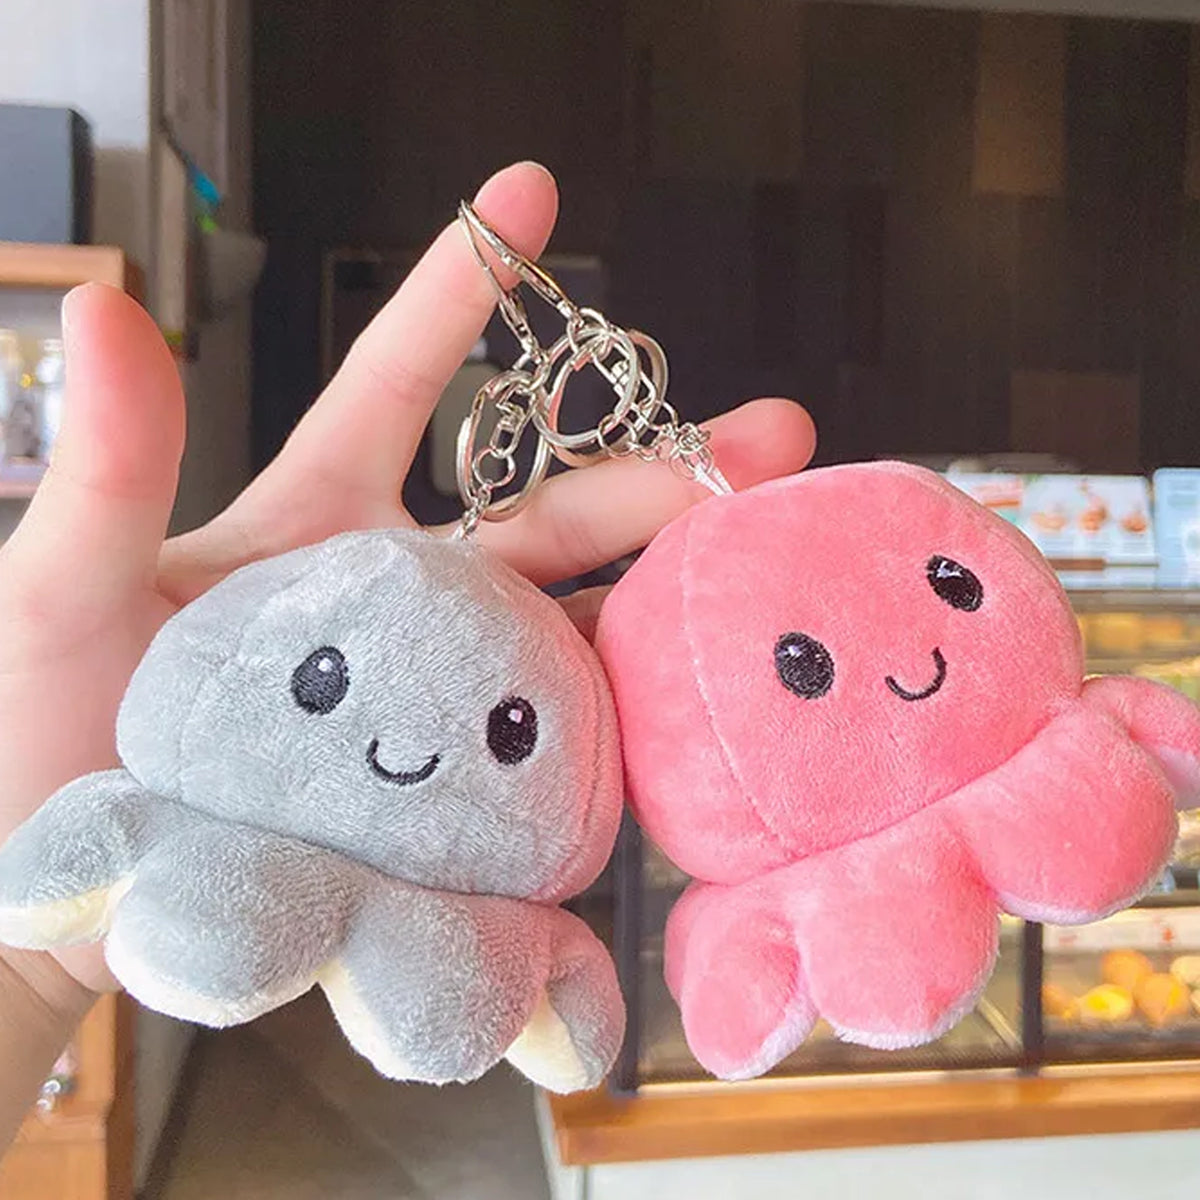 Mini Octopus Face Changing Flippy Soft Plush Keychains - Assorted